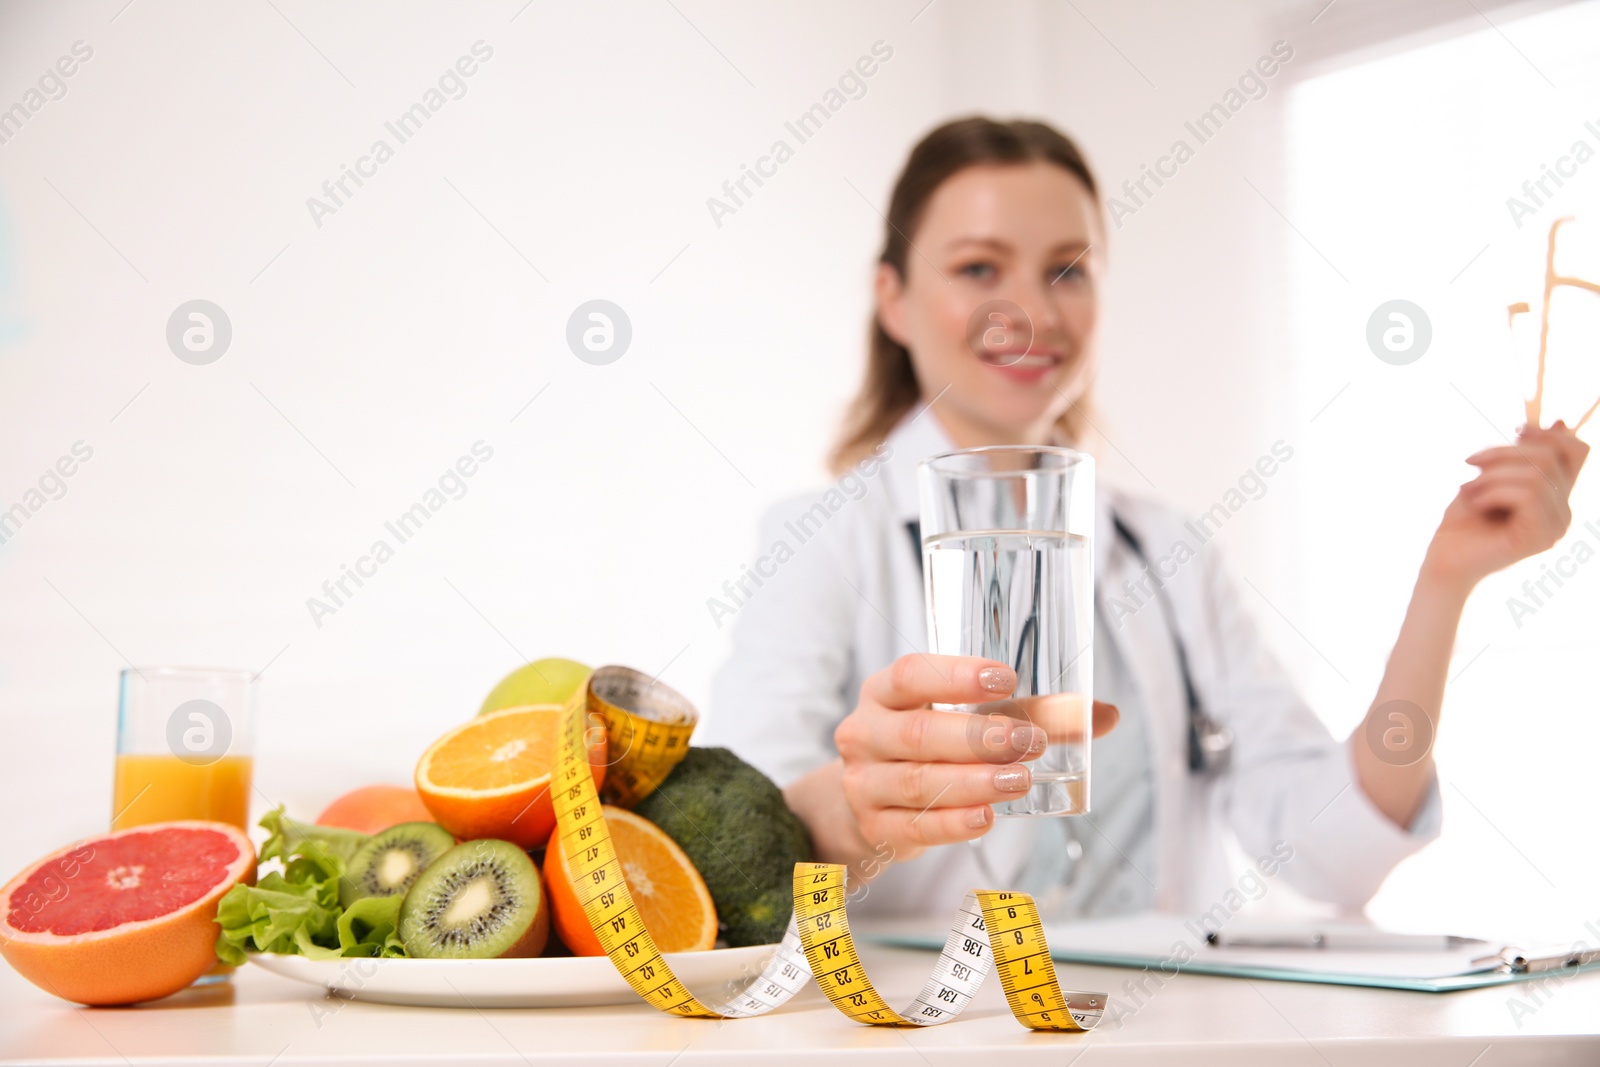 Photo of Nutritionist with glass of water, fruits, vegetables and measuring tape in office